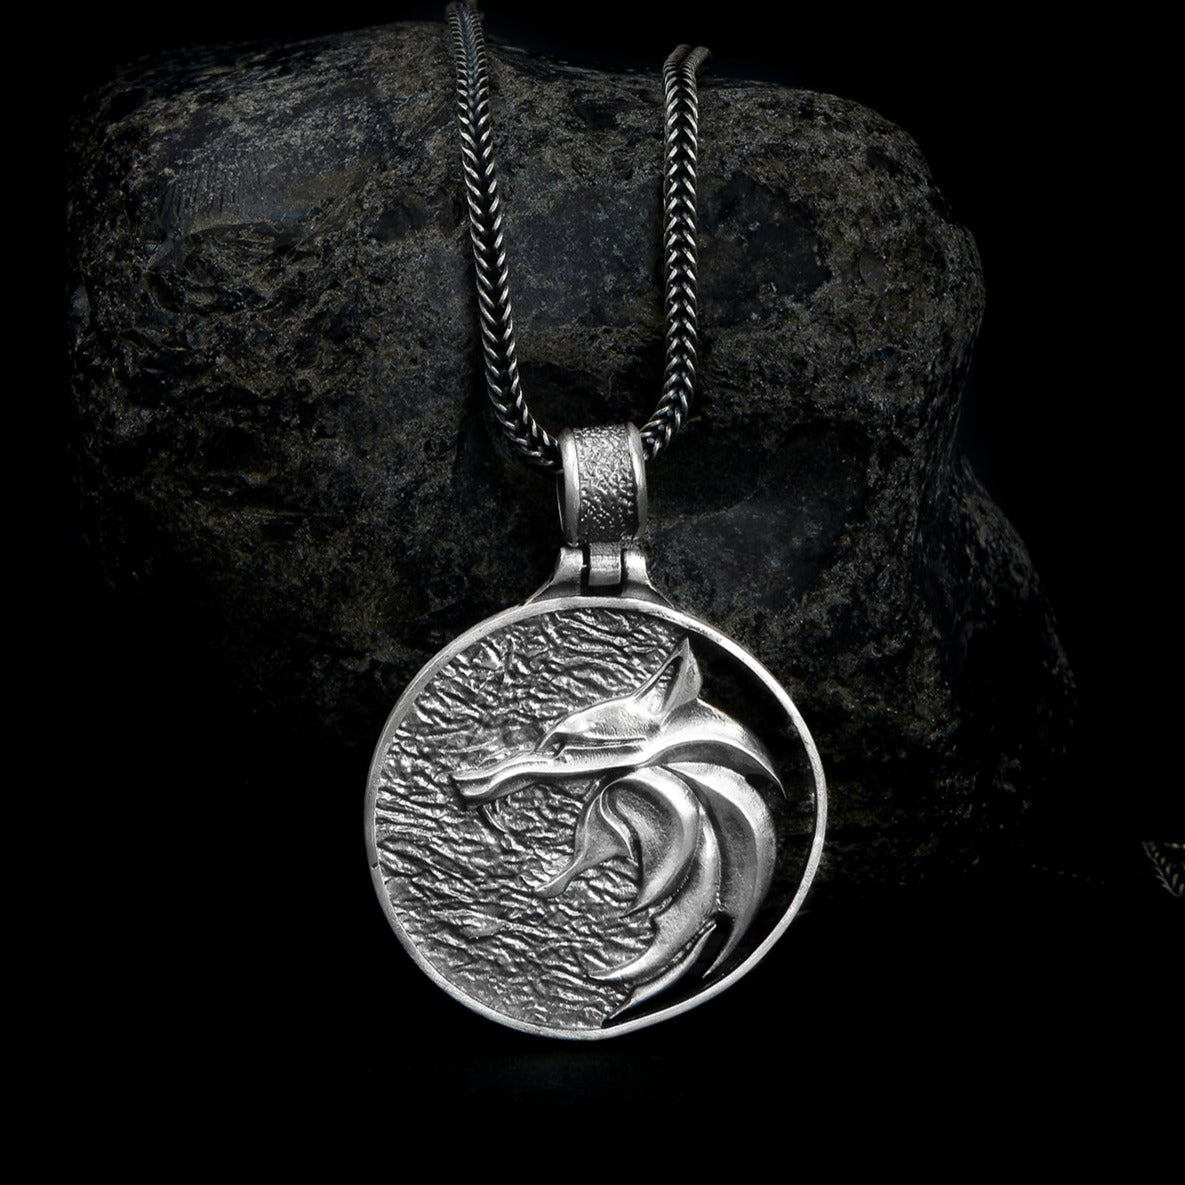 Handcrafted sterling silver Witcher Wolf Necklace, capturing the intricate design of the iconic wolf emblem from the Witcher series.